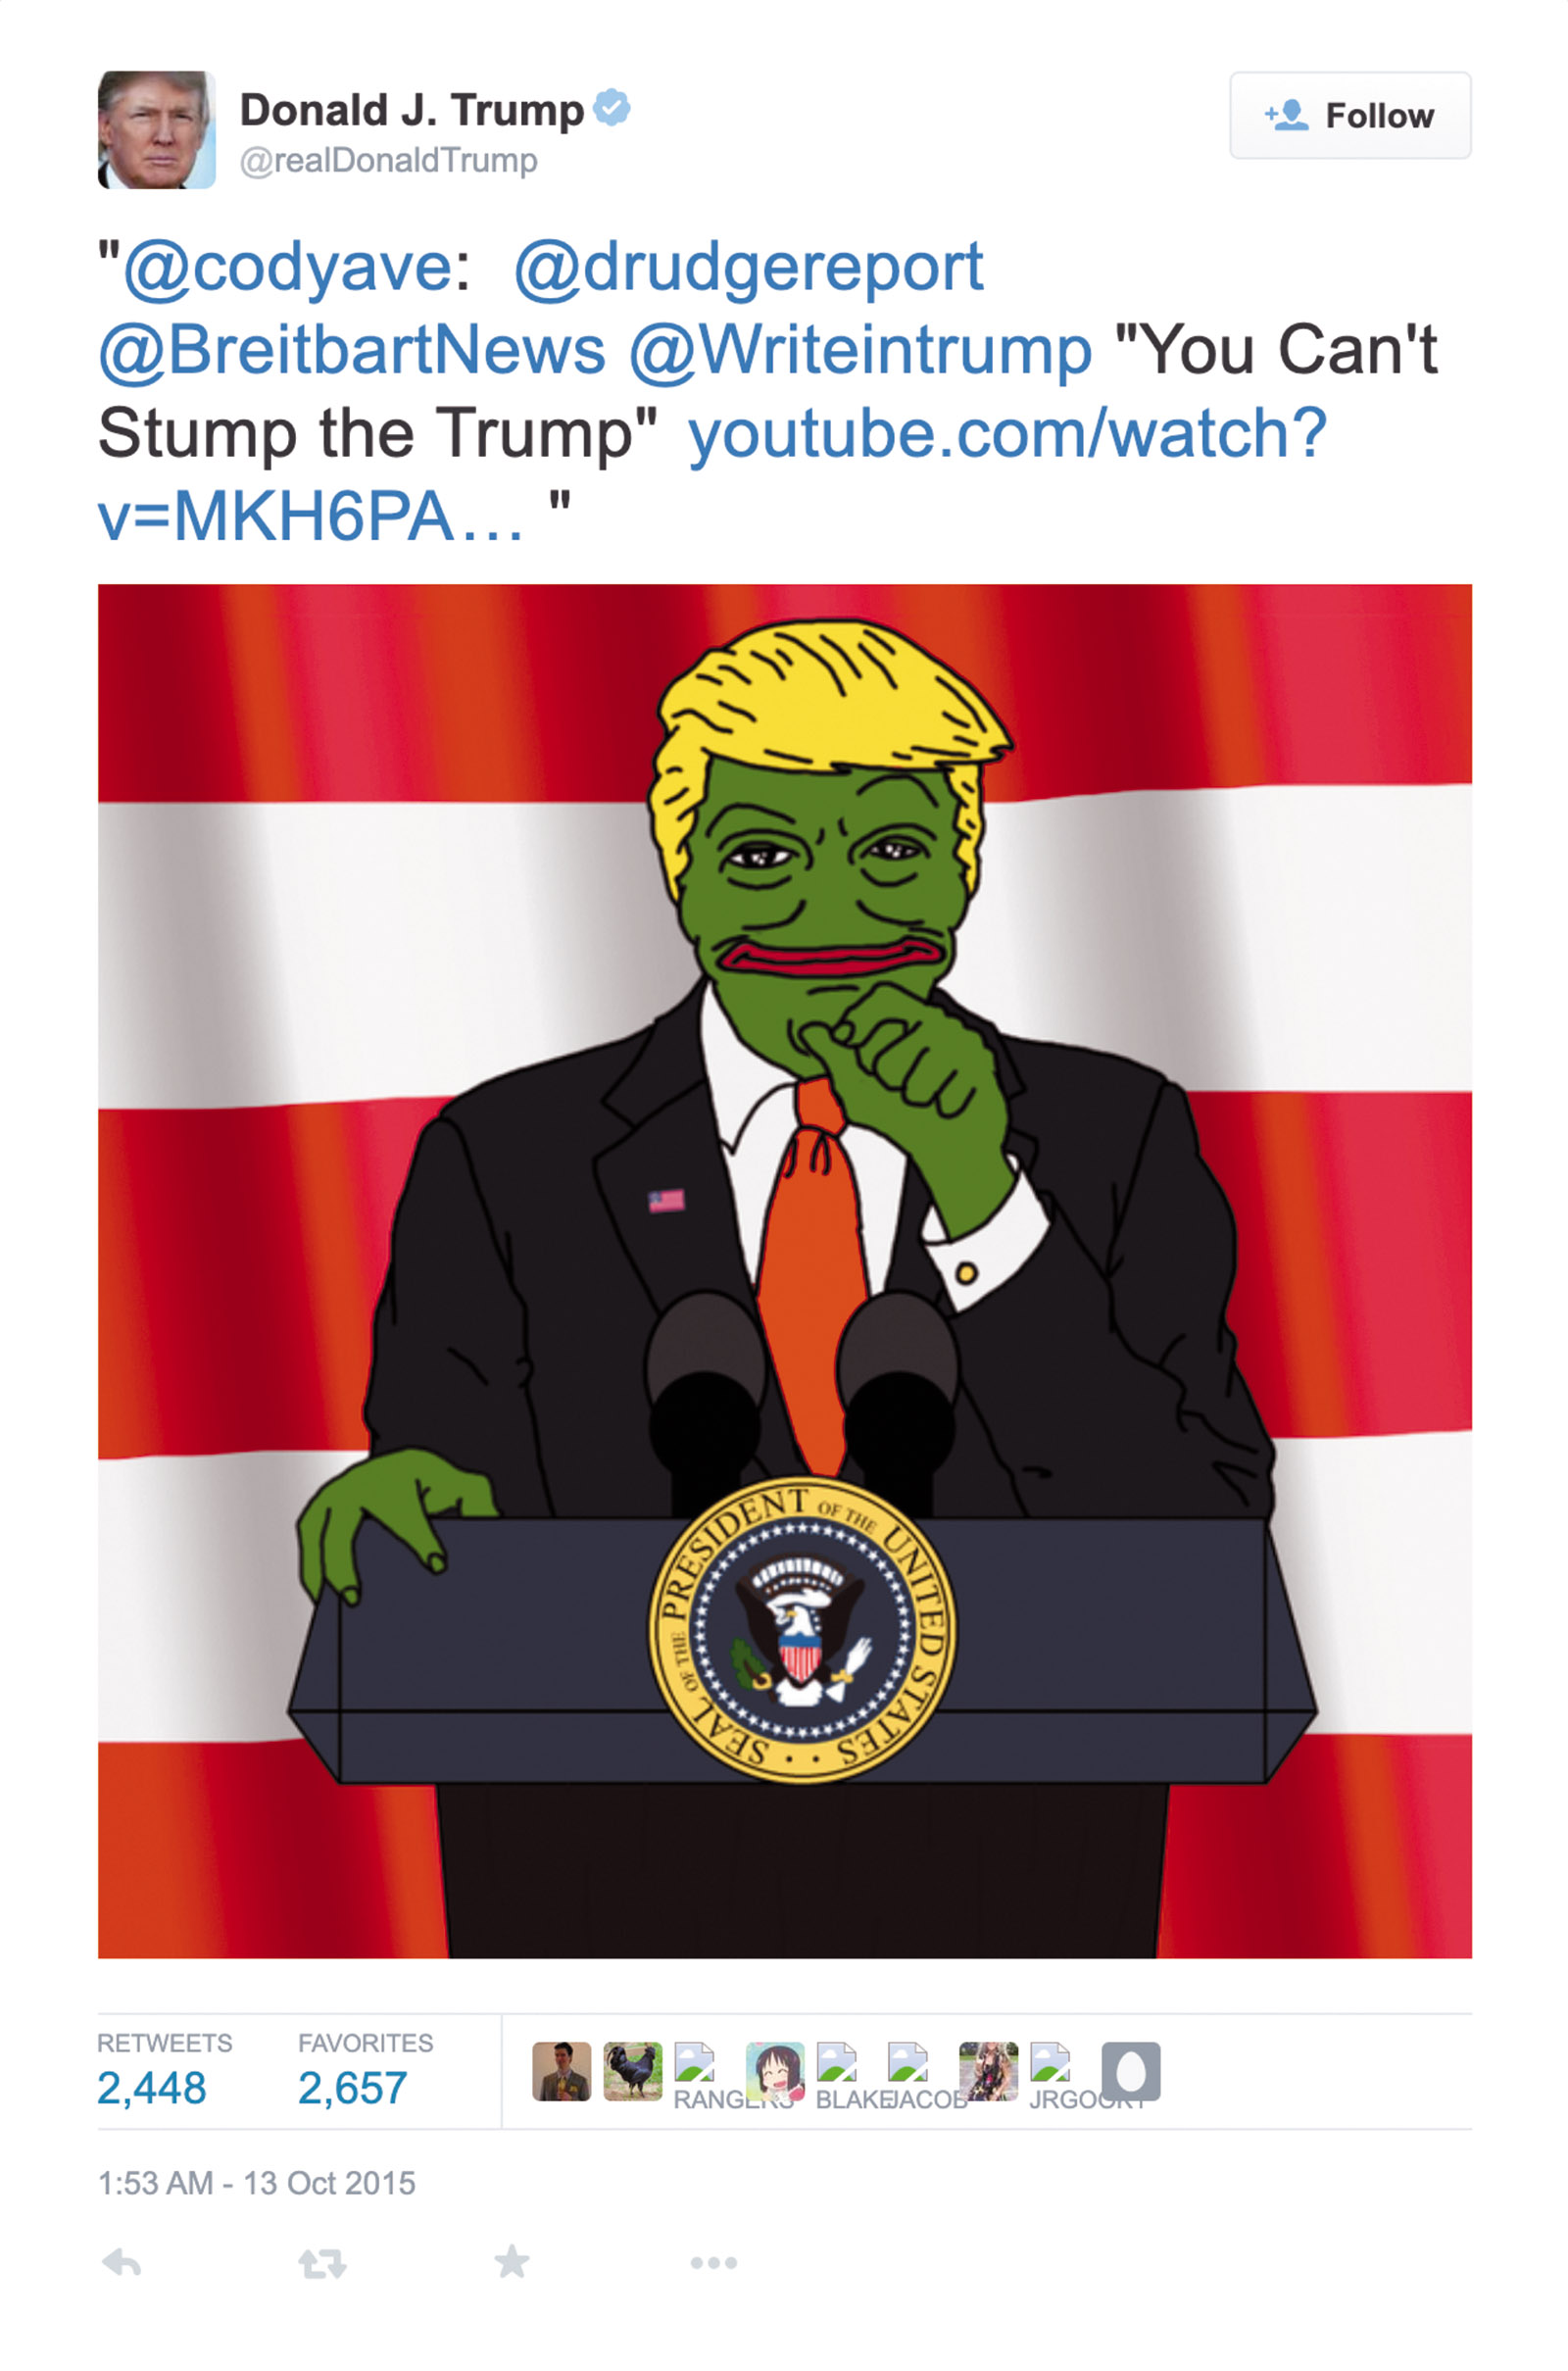 A tweet by Donald Trump featuring an image of himself as Pepe the Frog, a symbol used by the far right, October 13, 2015